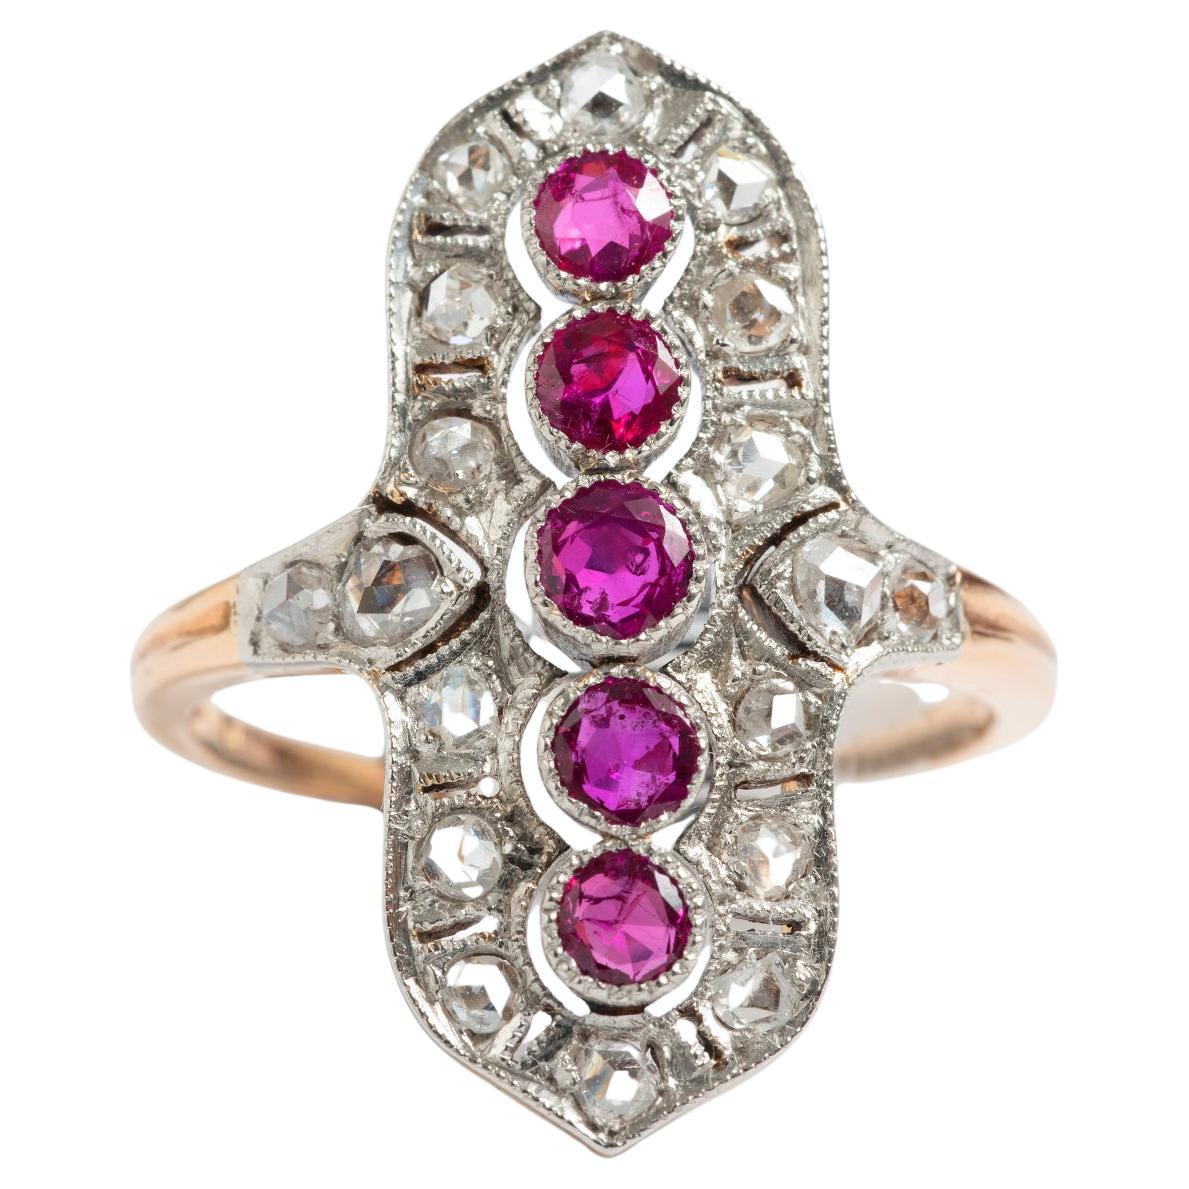 Antique Diamond & Ruby Ring, 1900's, 5 x Rubies, 15K Yellow Gold. US Size 8.75